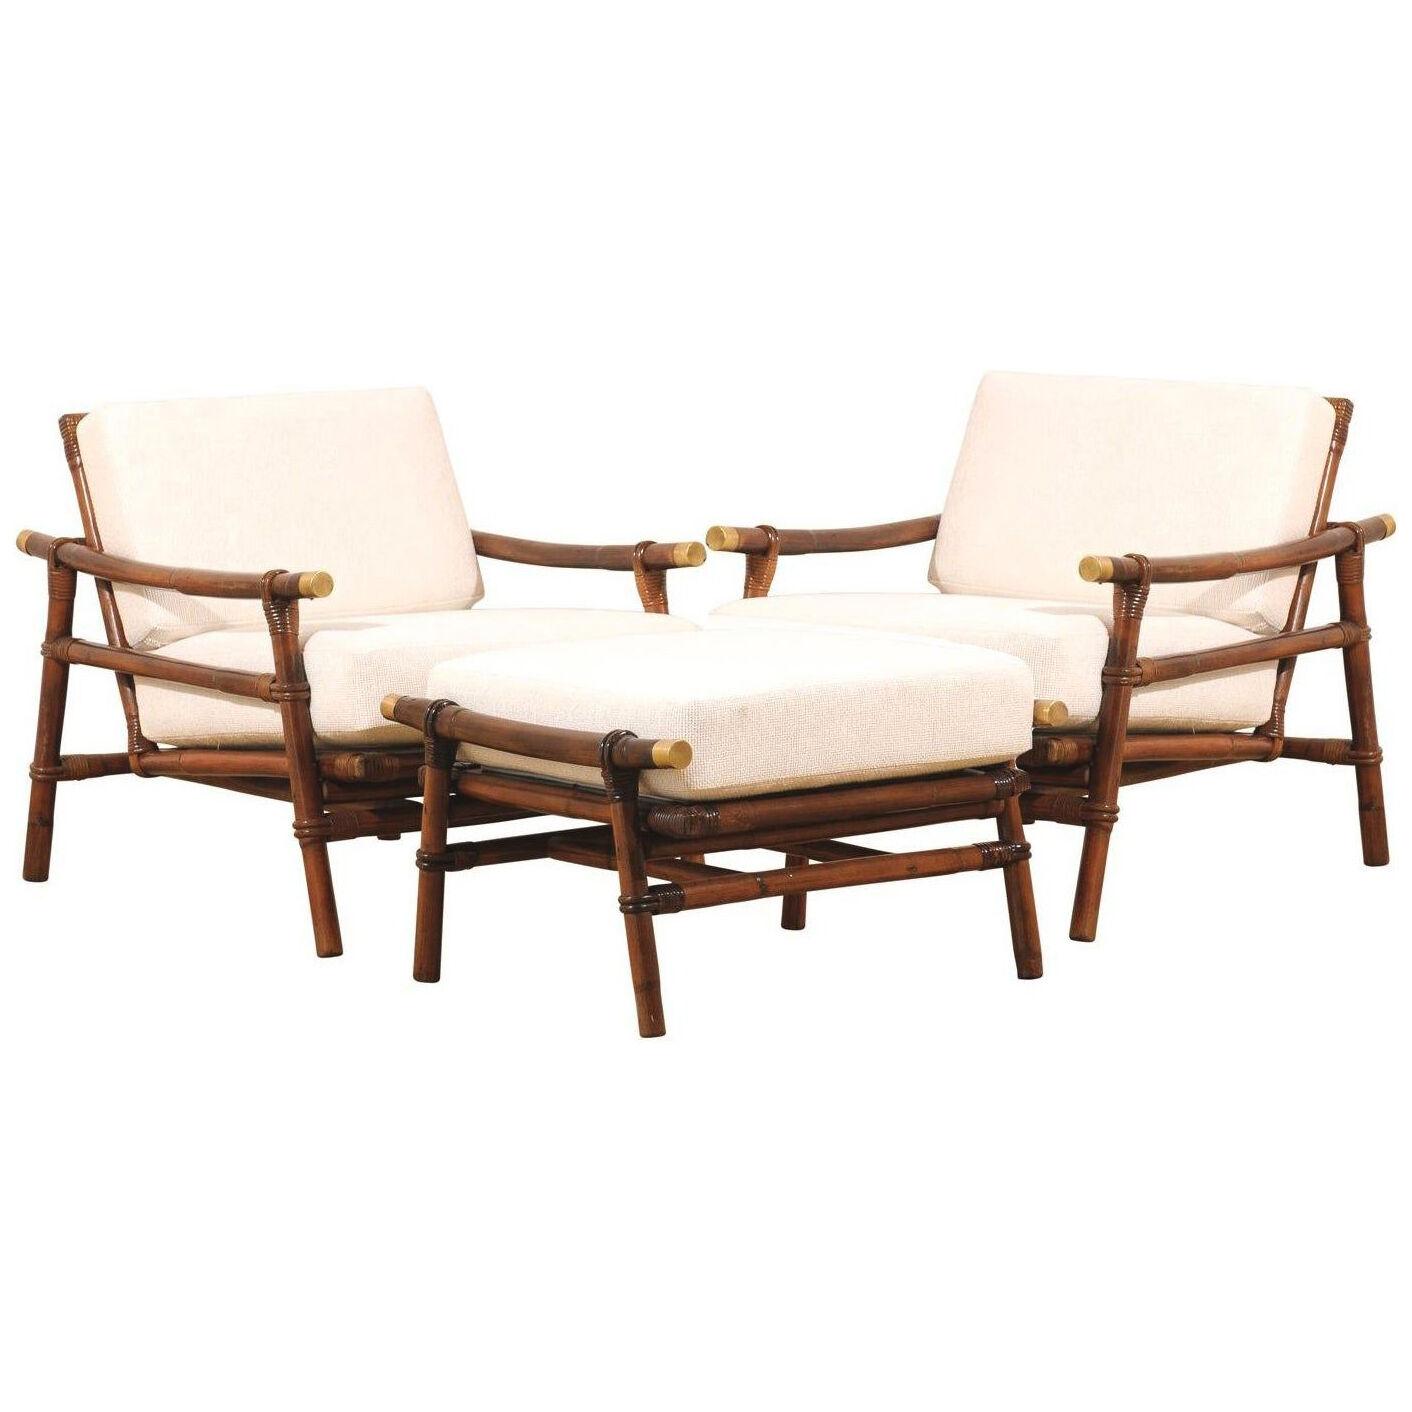 Four Superb Restored Loungers by John Wisner for Ficks Reed, circa 1954